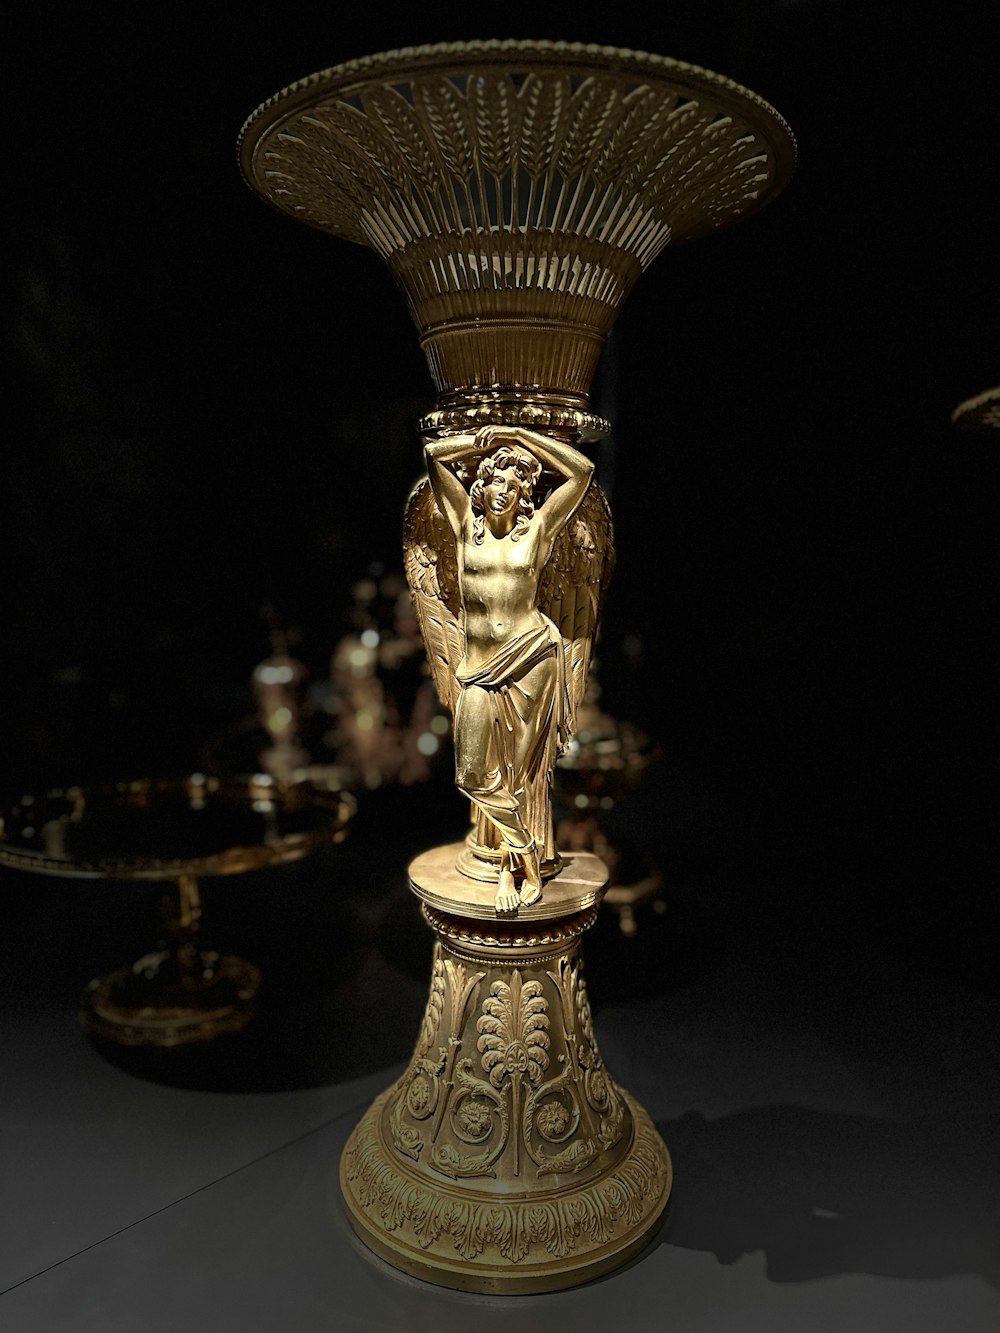 a gold statue of a woman holding a vase